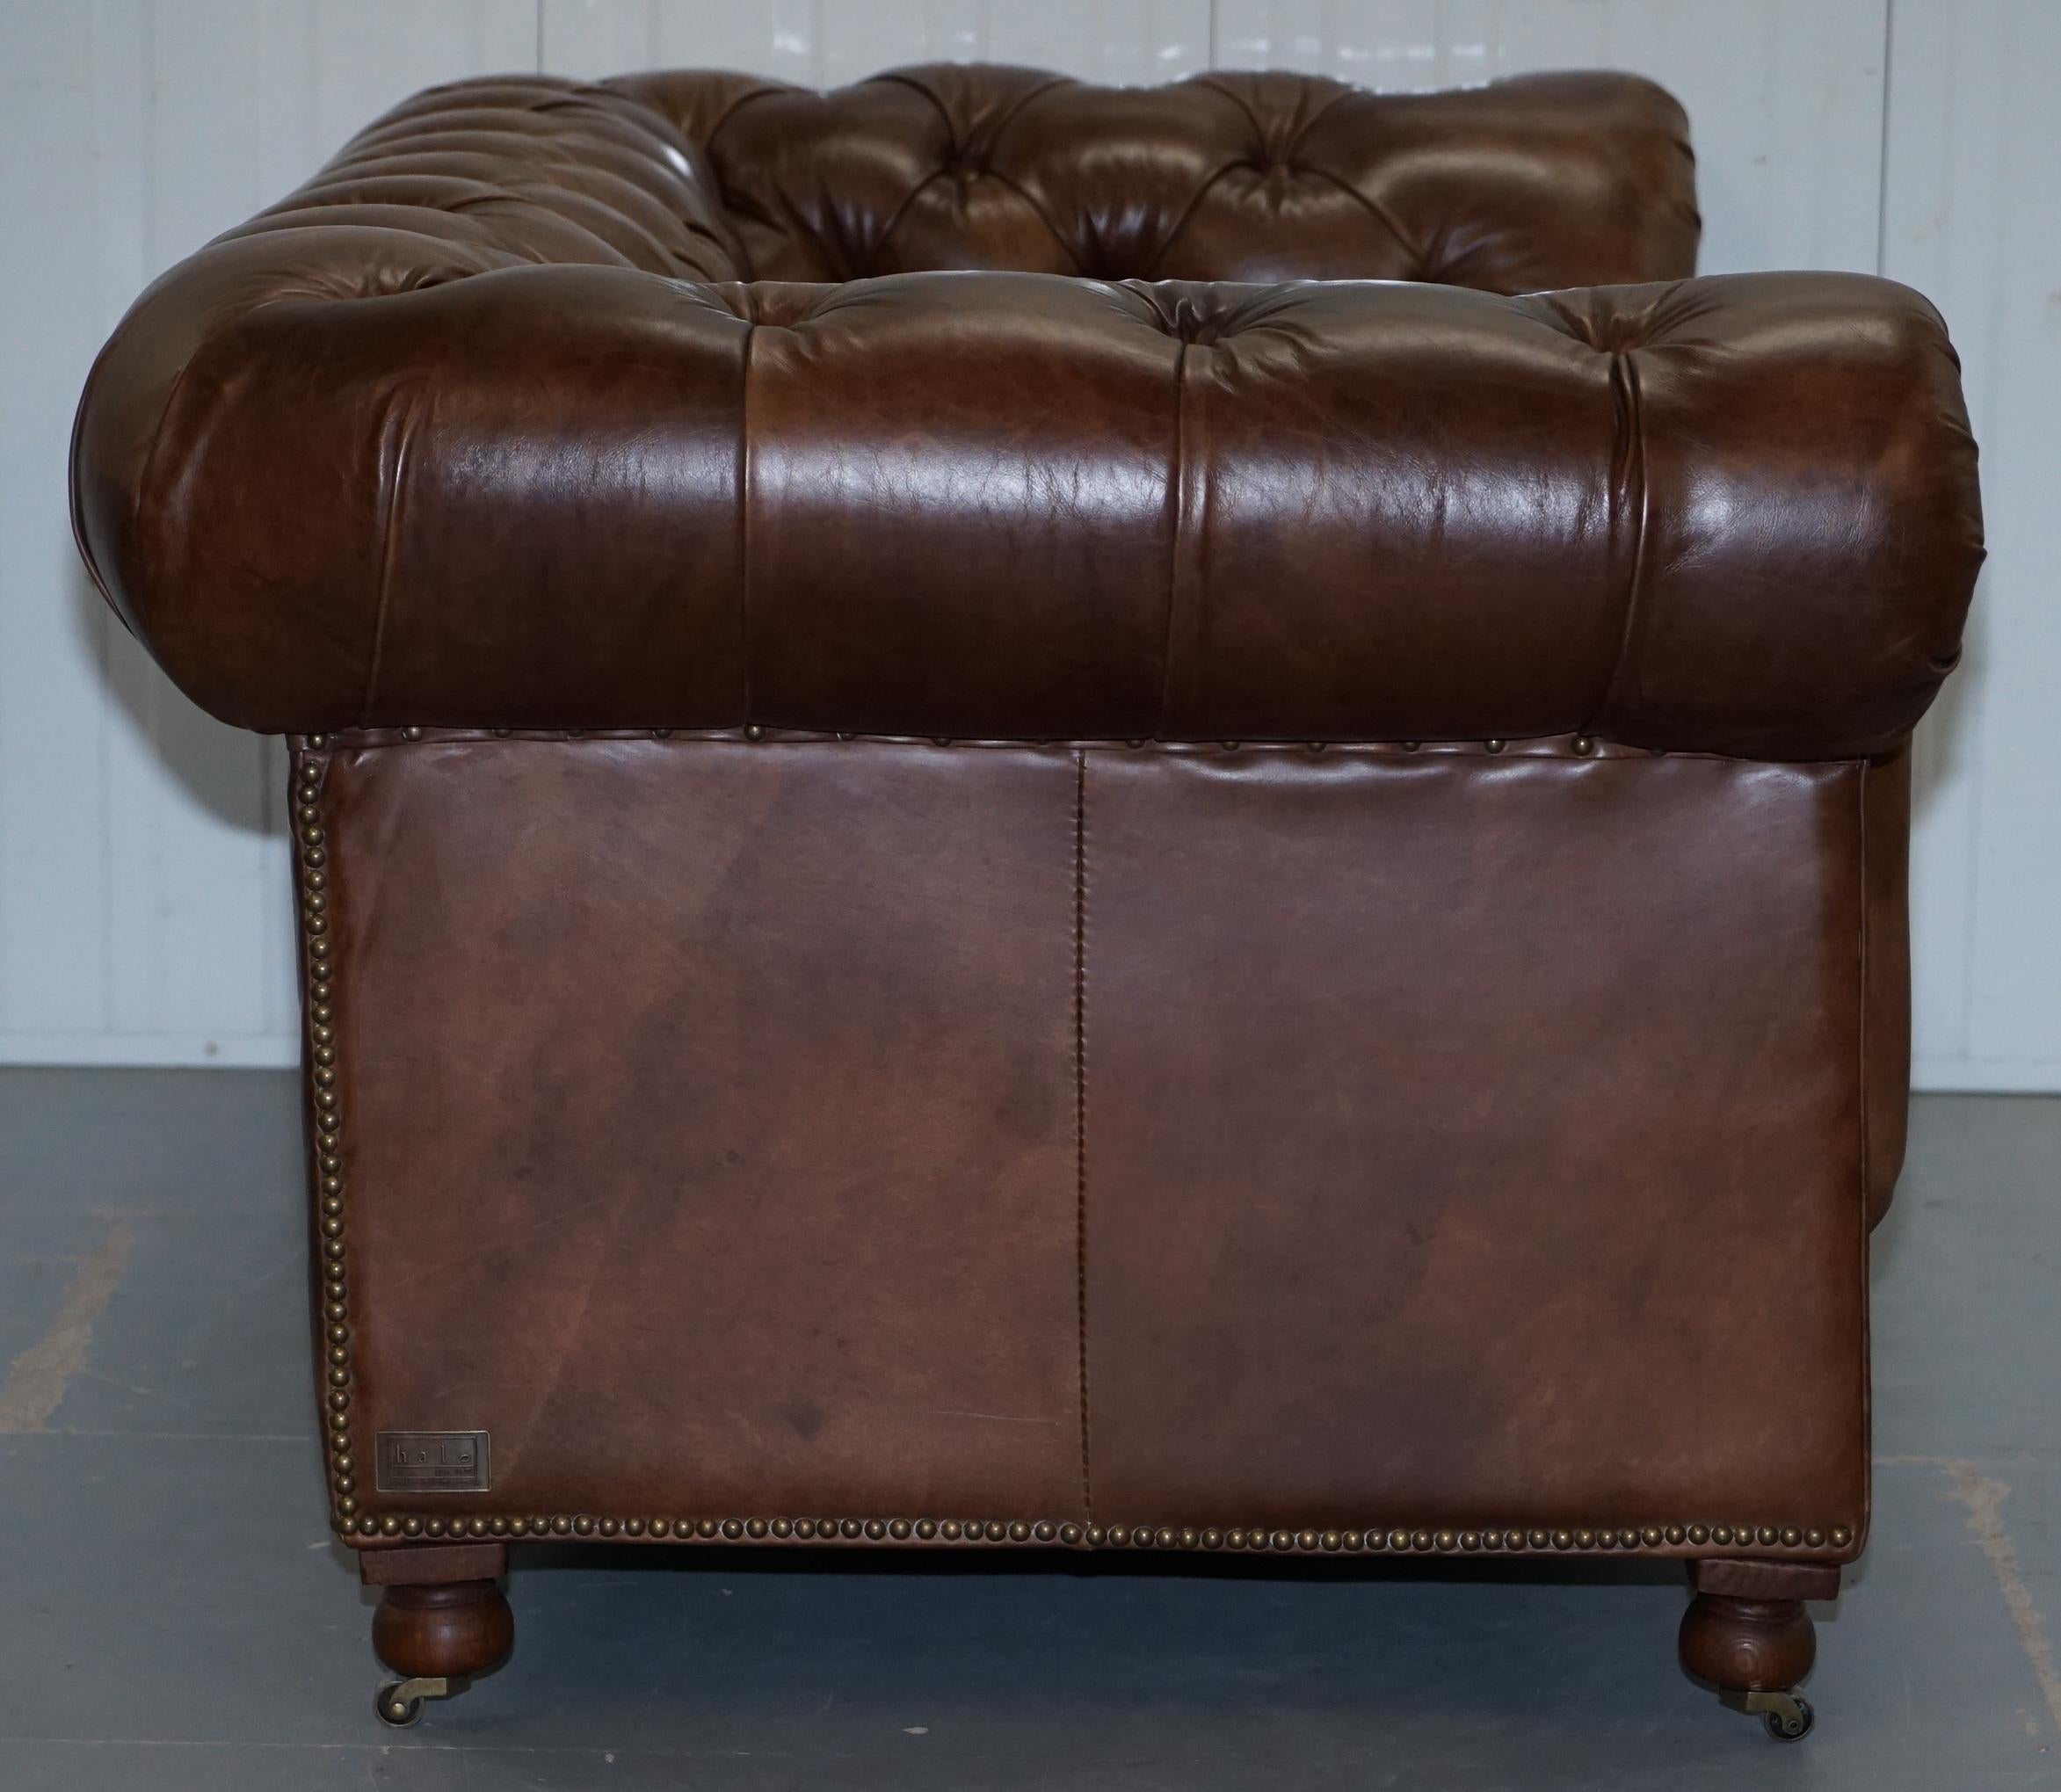 1 of 2 Timothy Oulton Halo Westminster Brown Leather Chesterfield Sofas 8